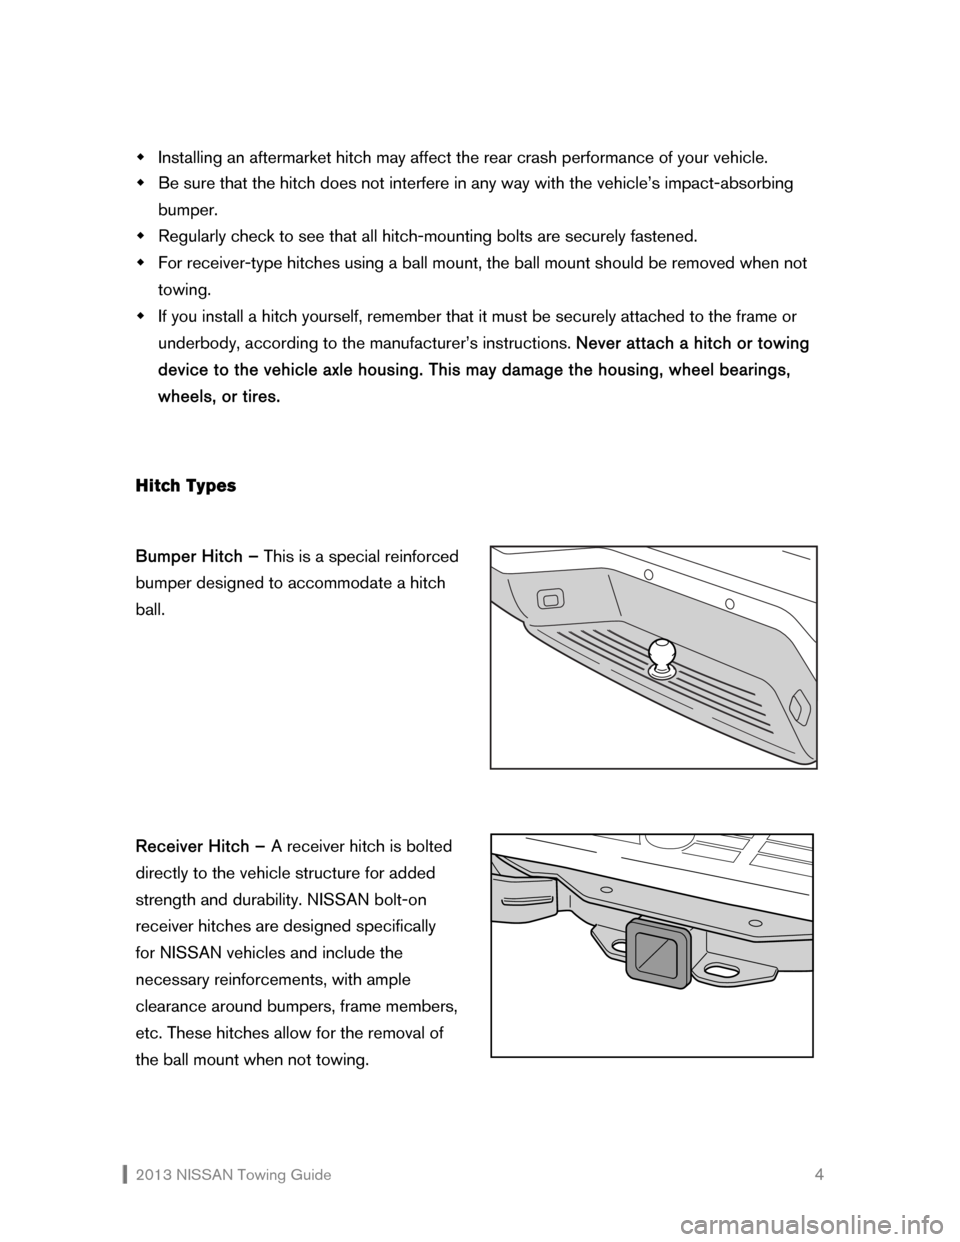 NISSAN 370Z ROADSTER 2013 Z34 Towing Guide  2013 NISSAN Towing Guide    4 �Š Installing an aftermarket hitch may affect the rear crash performance of your vehicle. 
�Š Be sure that the hitch does not interfere in any way with the vehicle’s